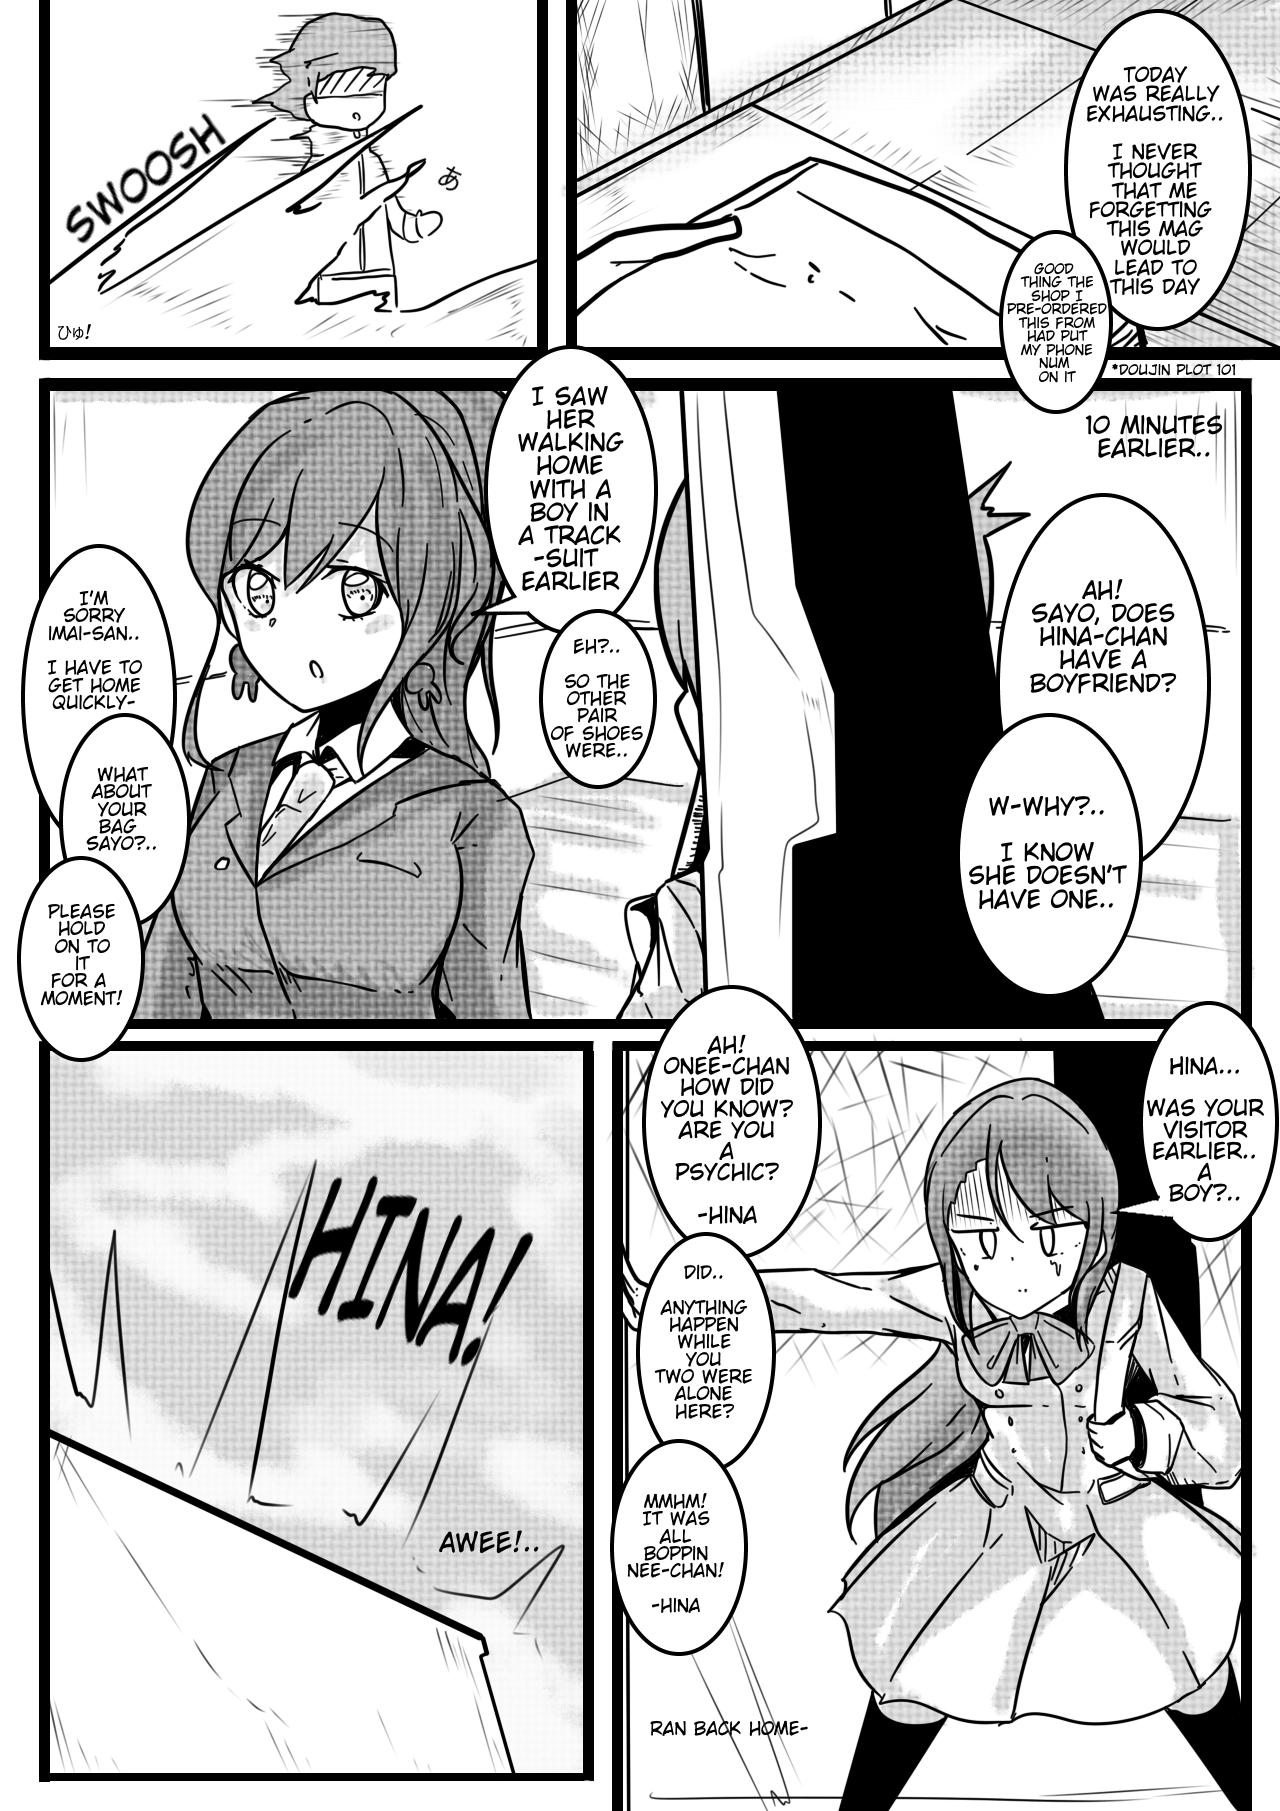 Gang Minty Surprise - Bang dream Jerk - Page 22